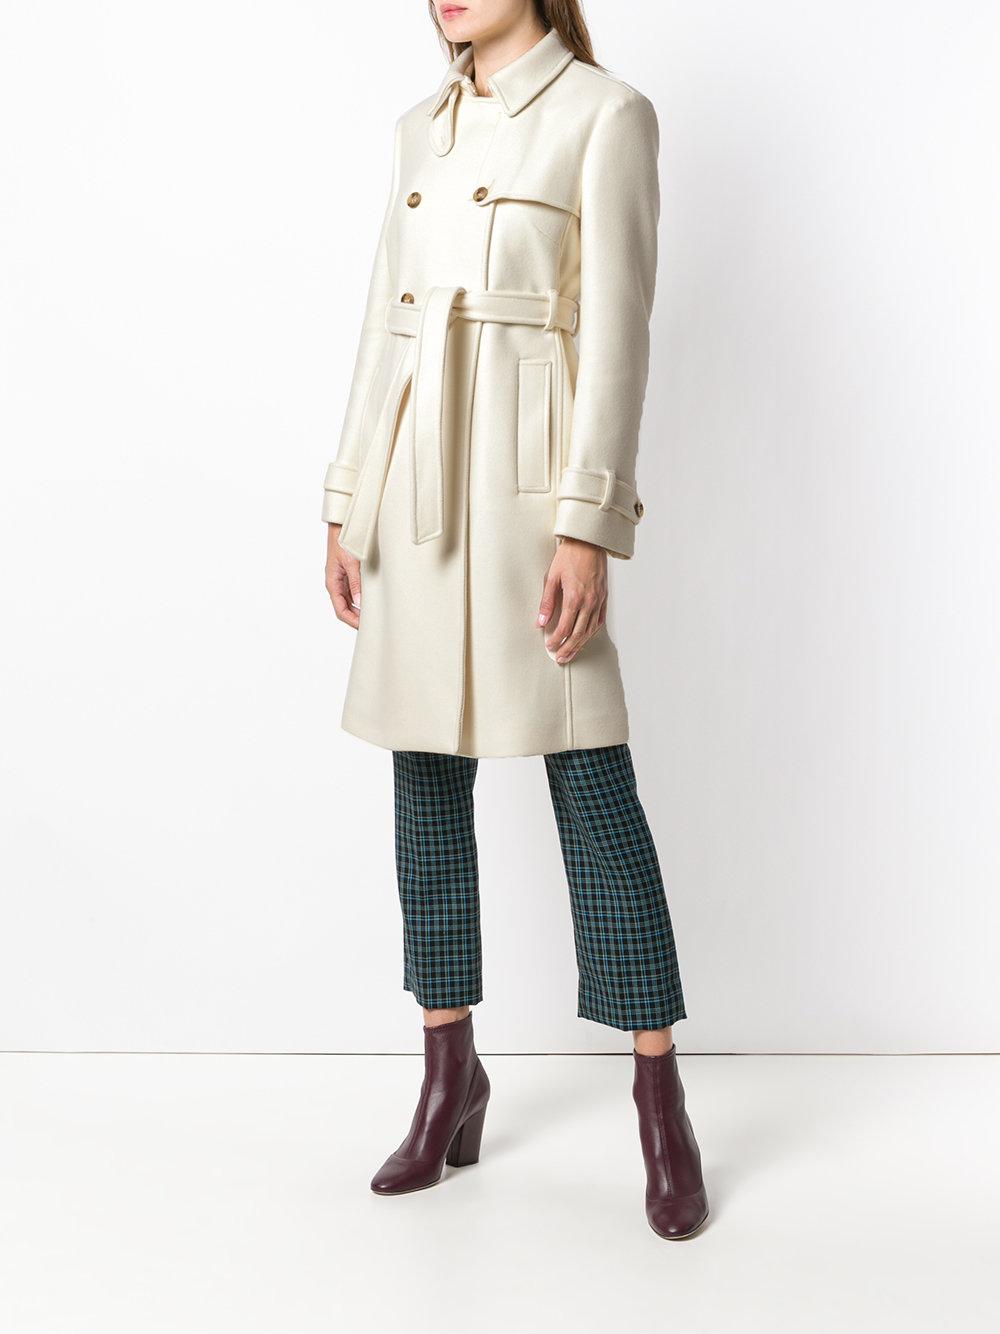 RED Valentino Double Breasted Belted Wool Coat in Ivory (White) | Lyst